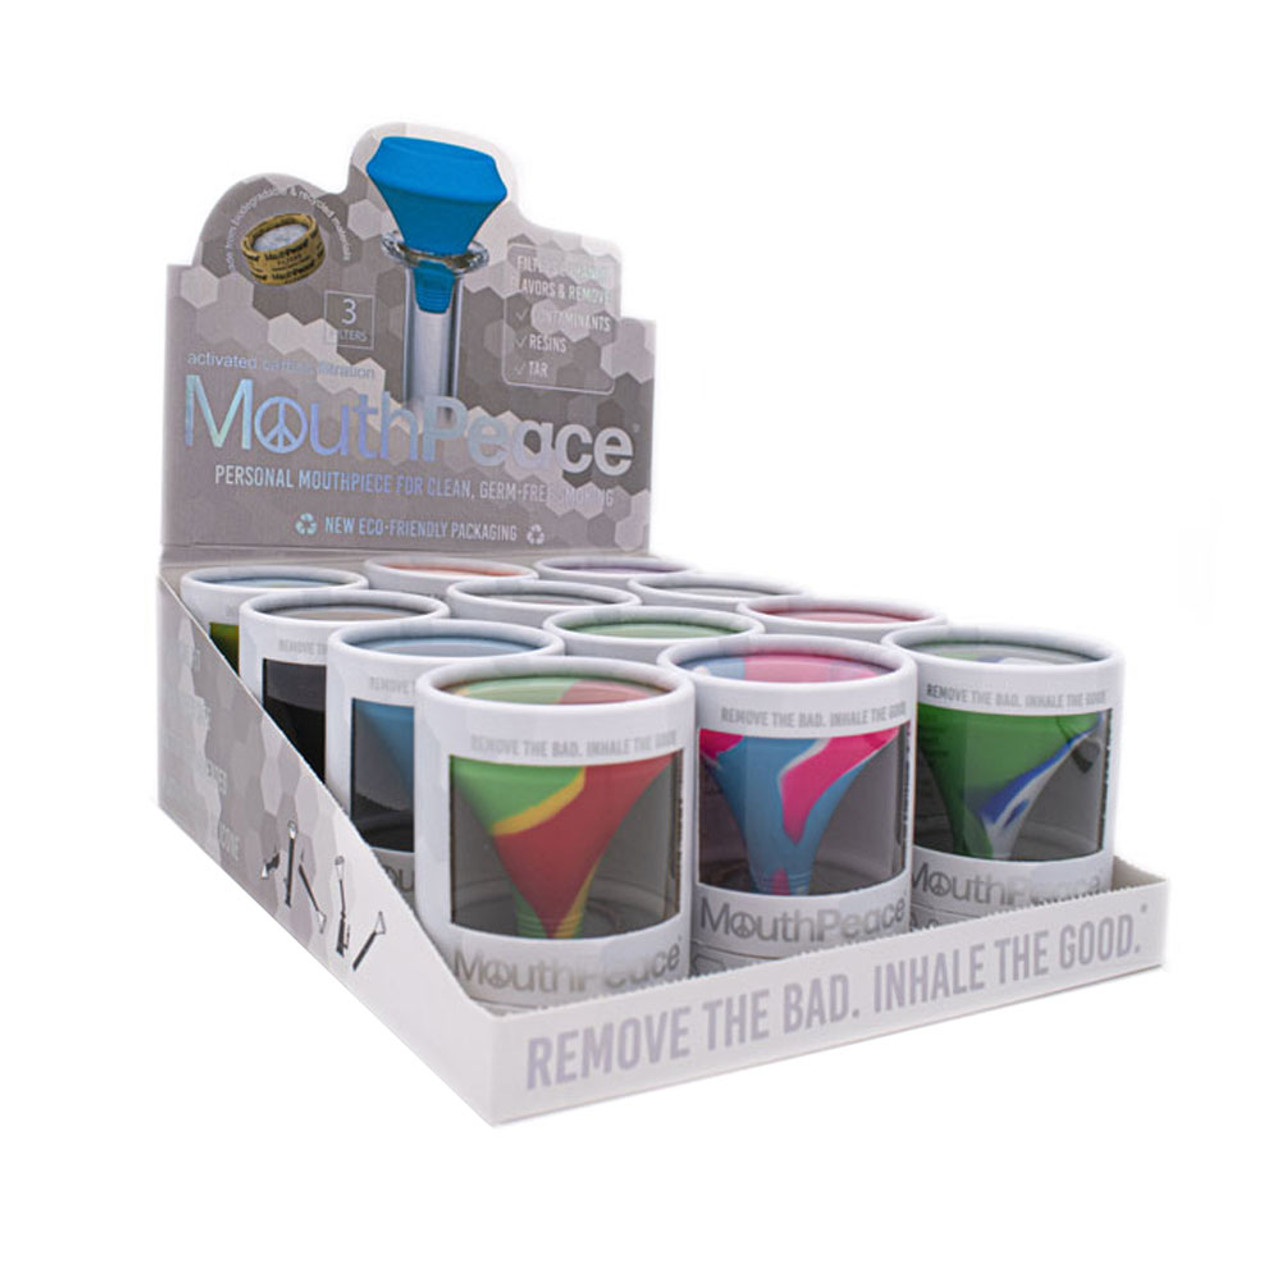 MouthPeace - Pipe Filter Kit - Display of 12